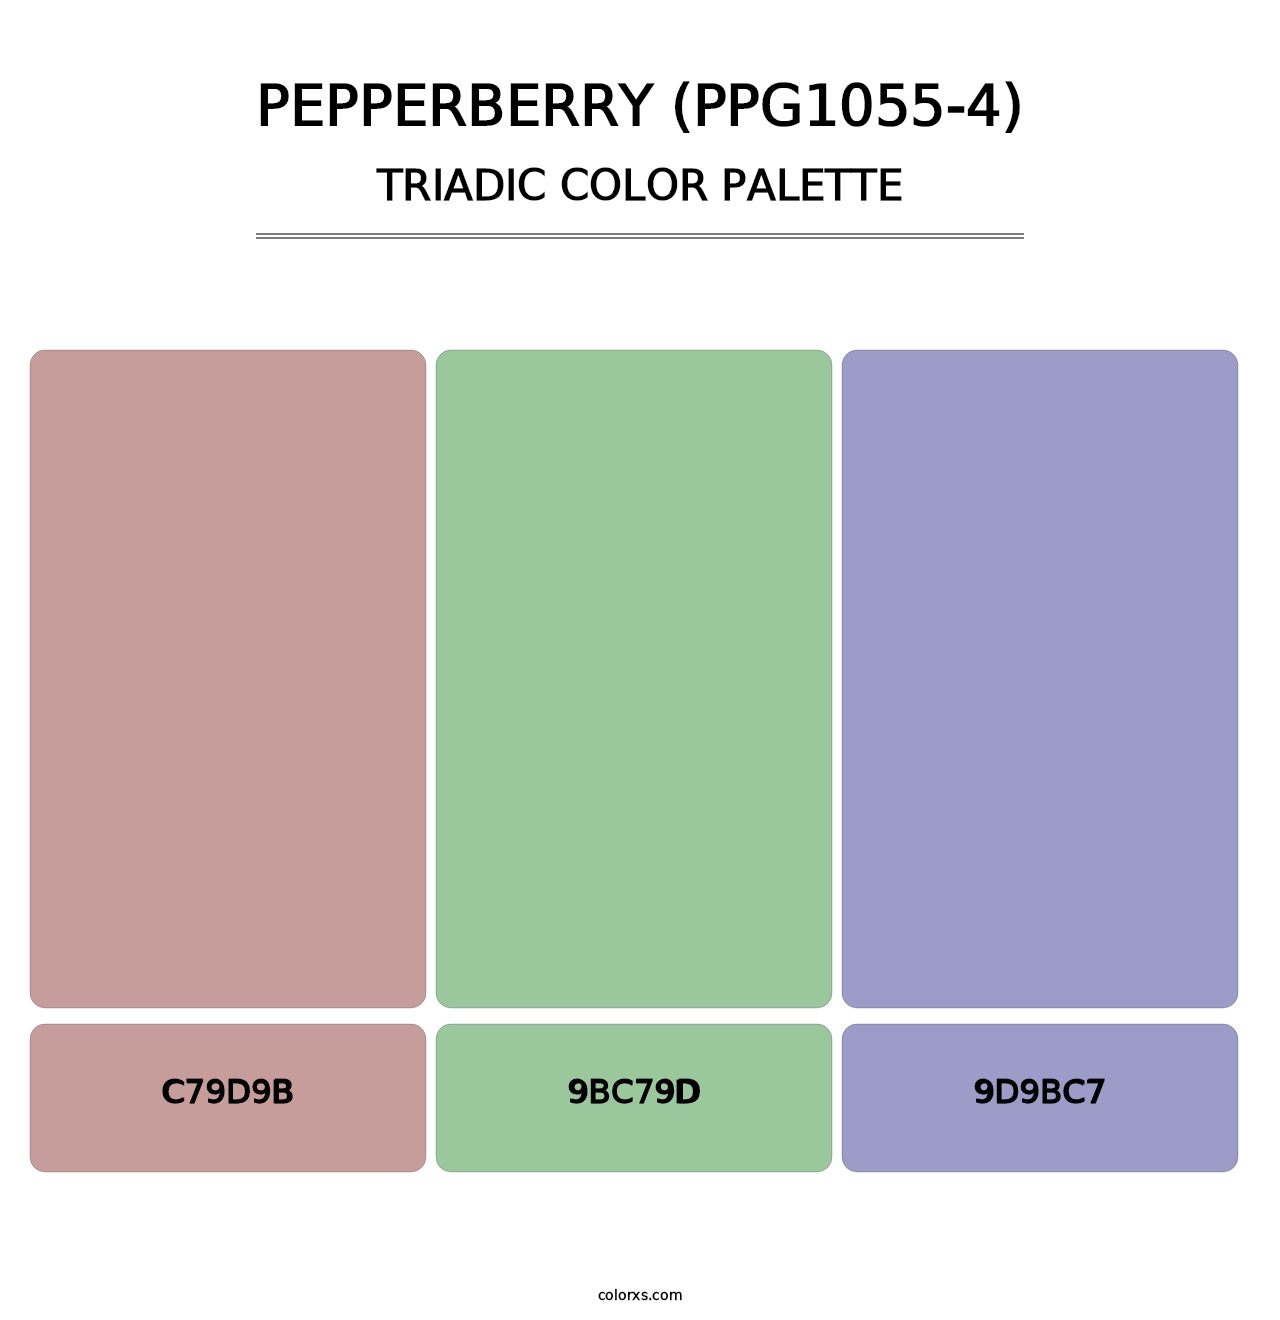 Pepperberry (PPG1055-4) - Triadic Color Palette